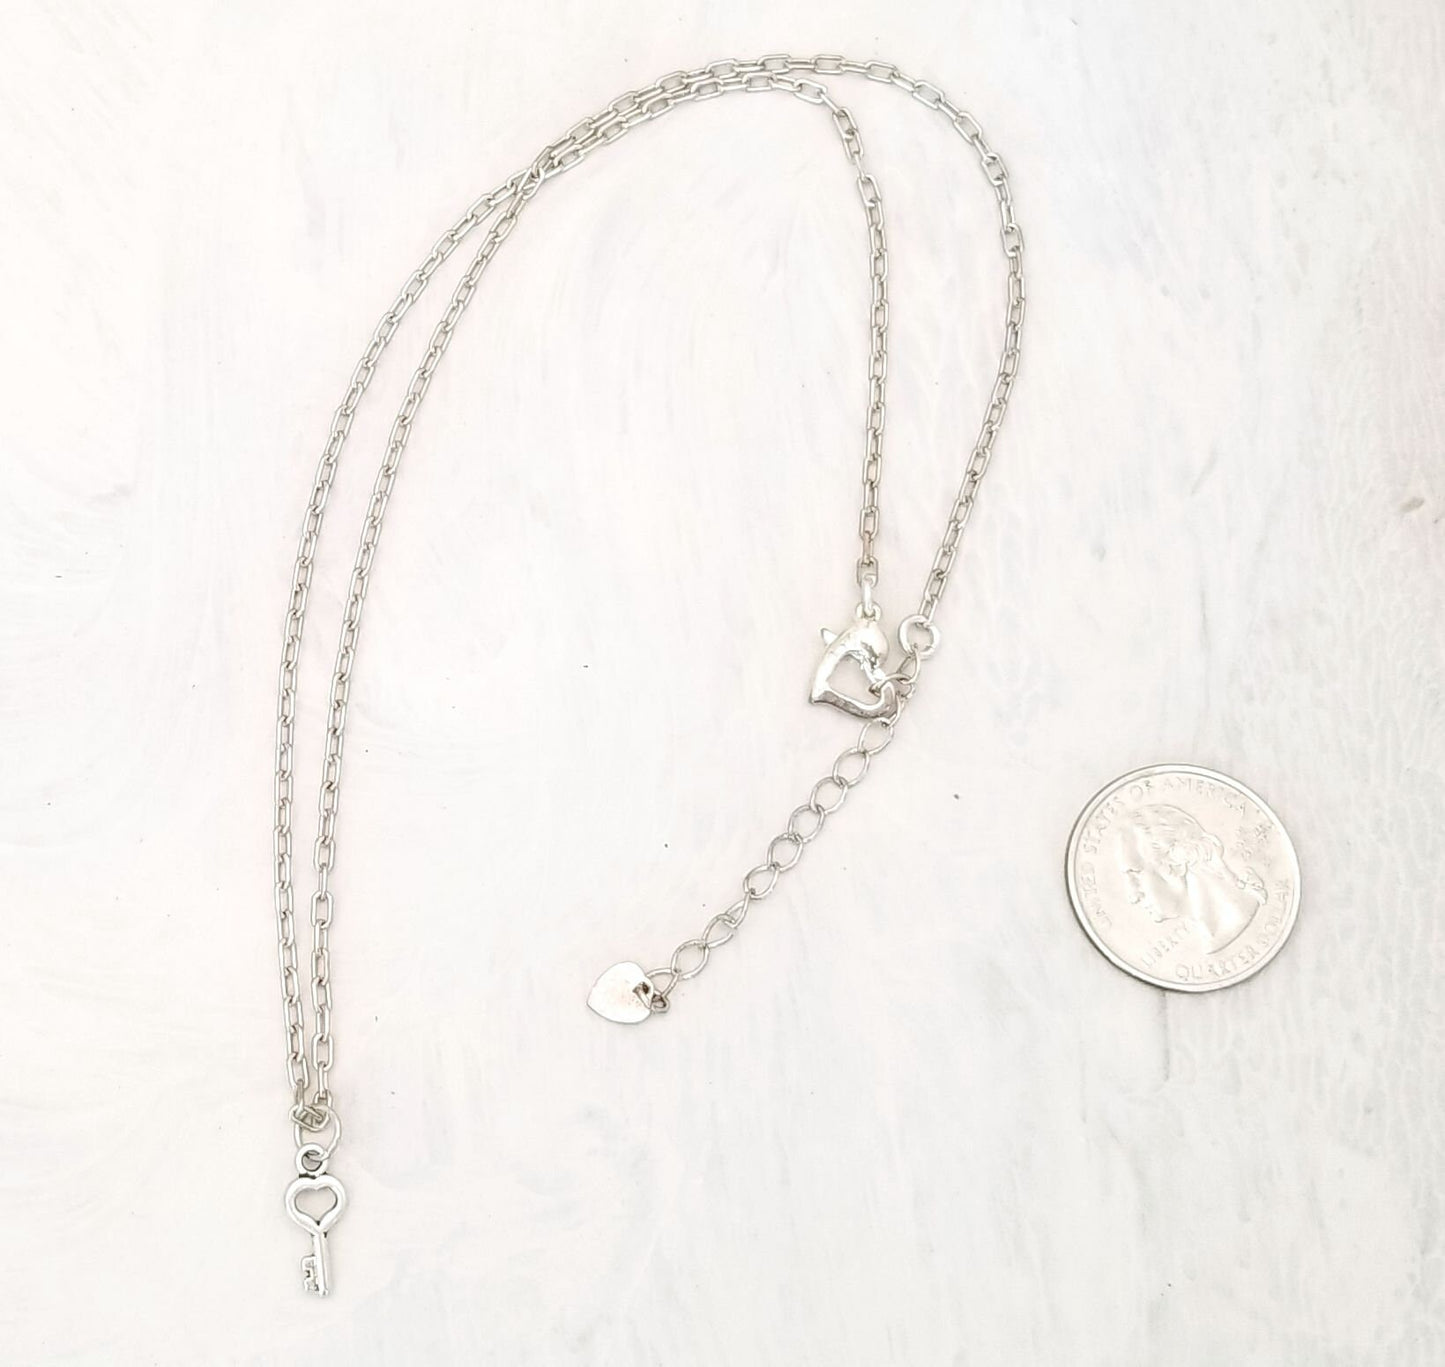 Chain Necklace, Silver Color, with Tiny Heart Key, Lobster Clasp, Adjustable from 18-20 inches, 45.3-50.8 cm